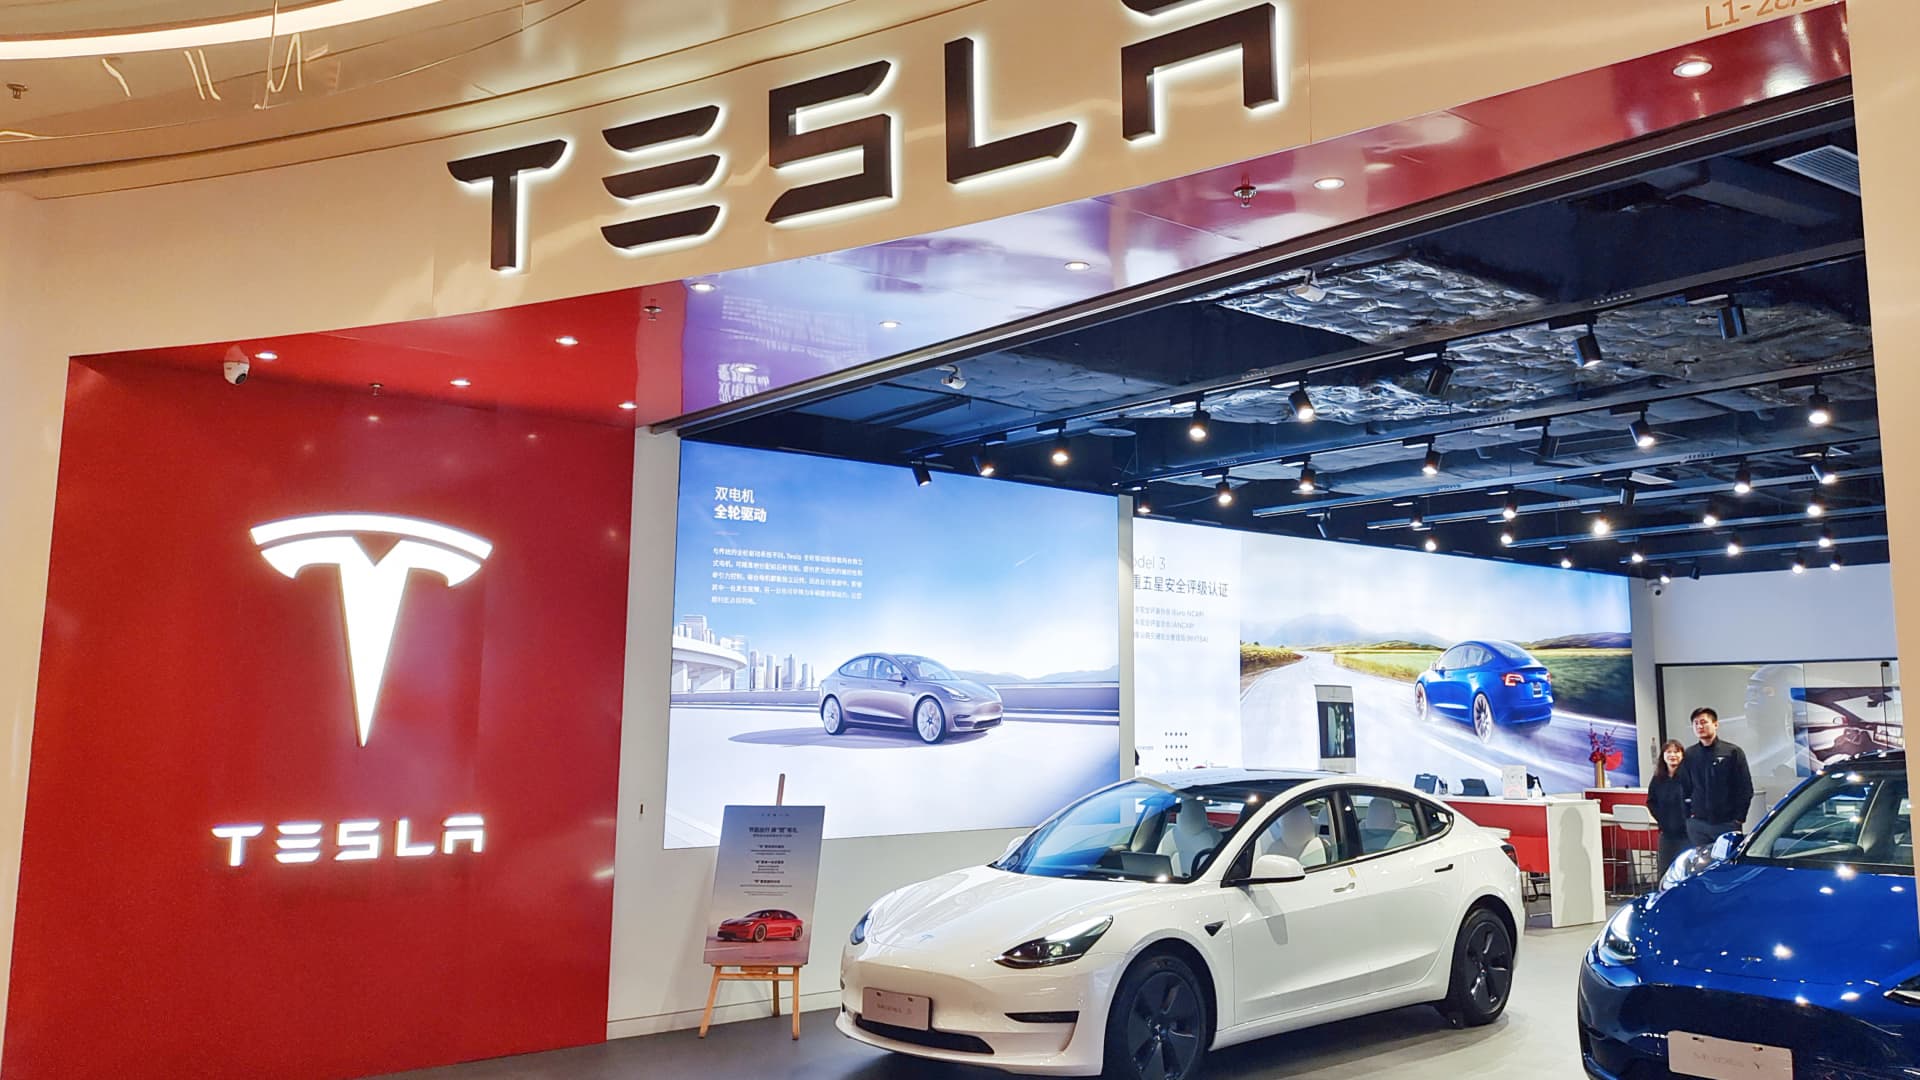 Tesla recalls 435,000 cars in China over rear light issue and will issue software update